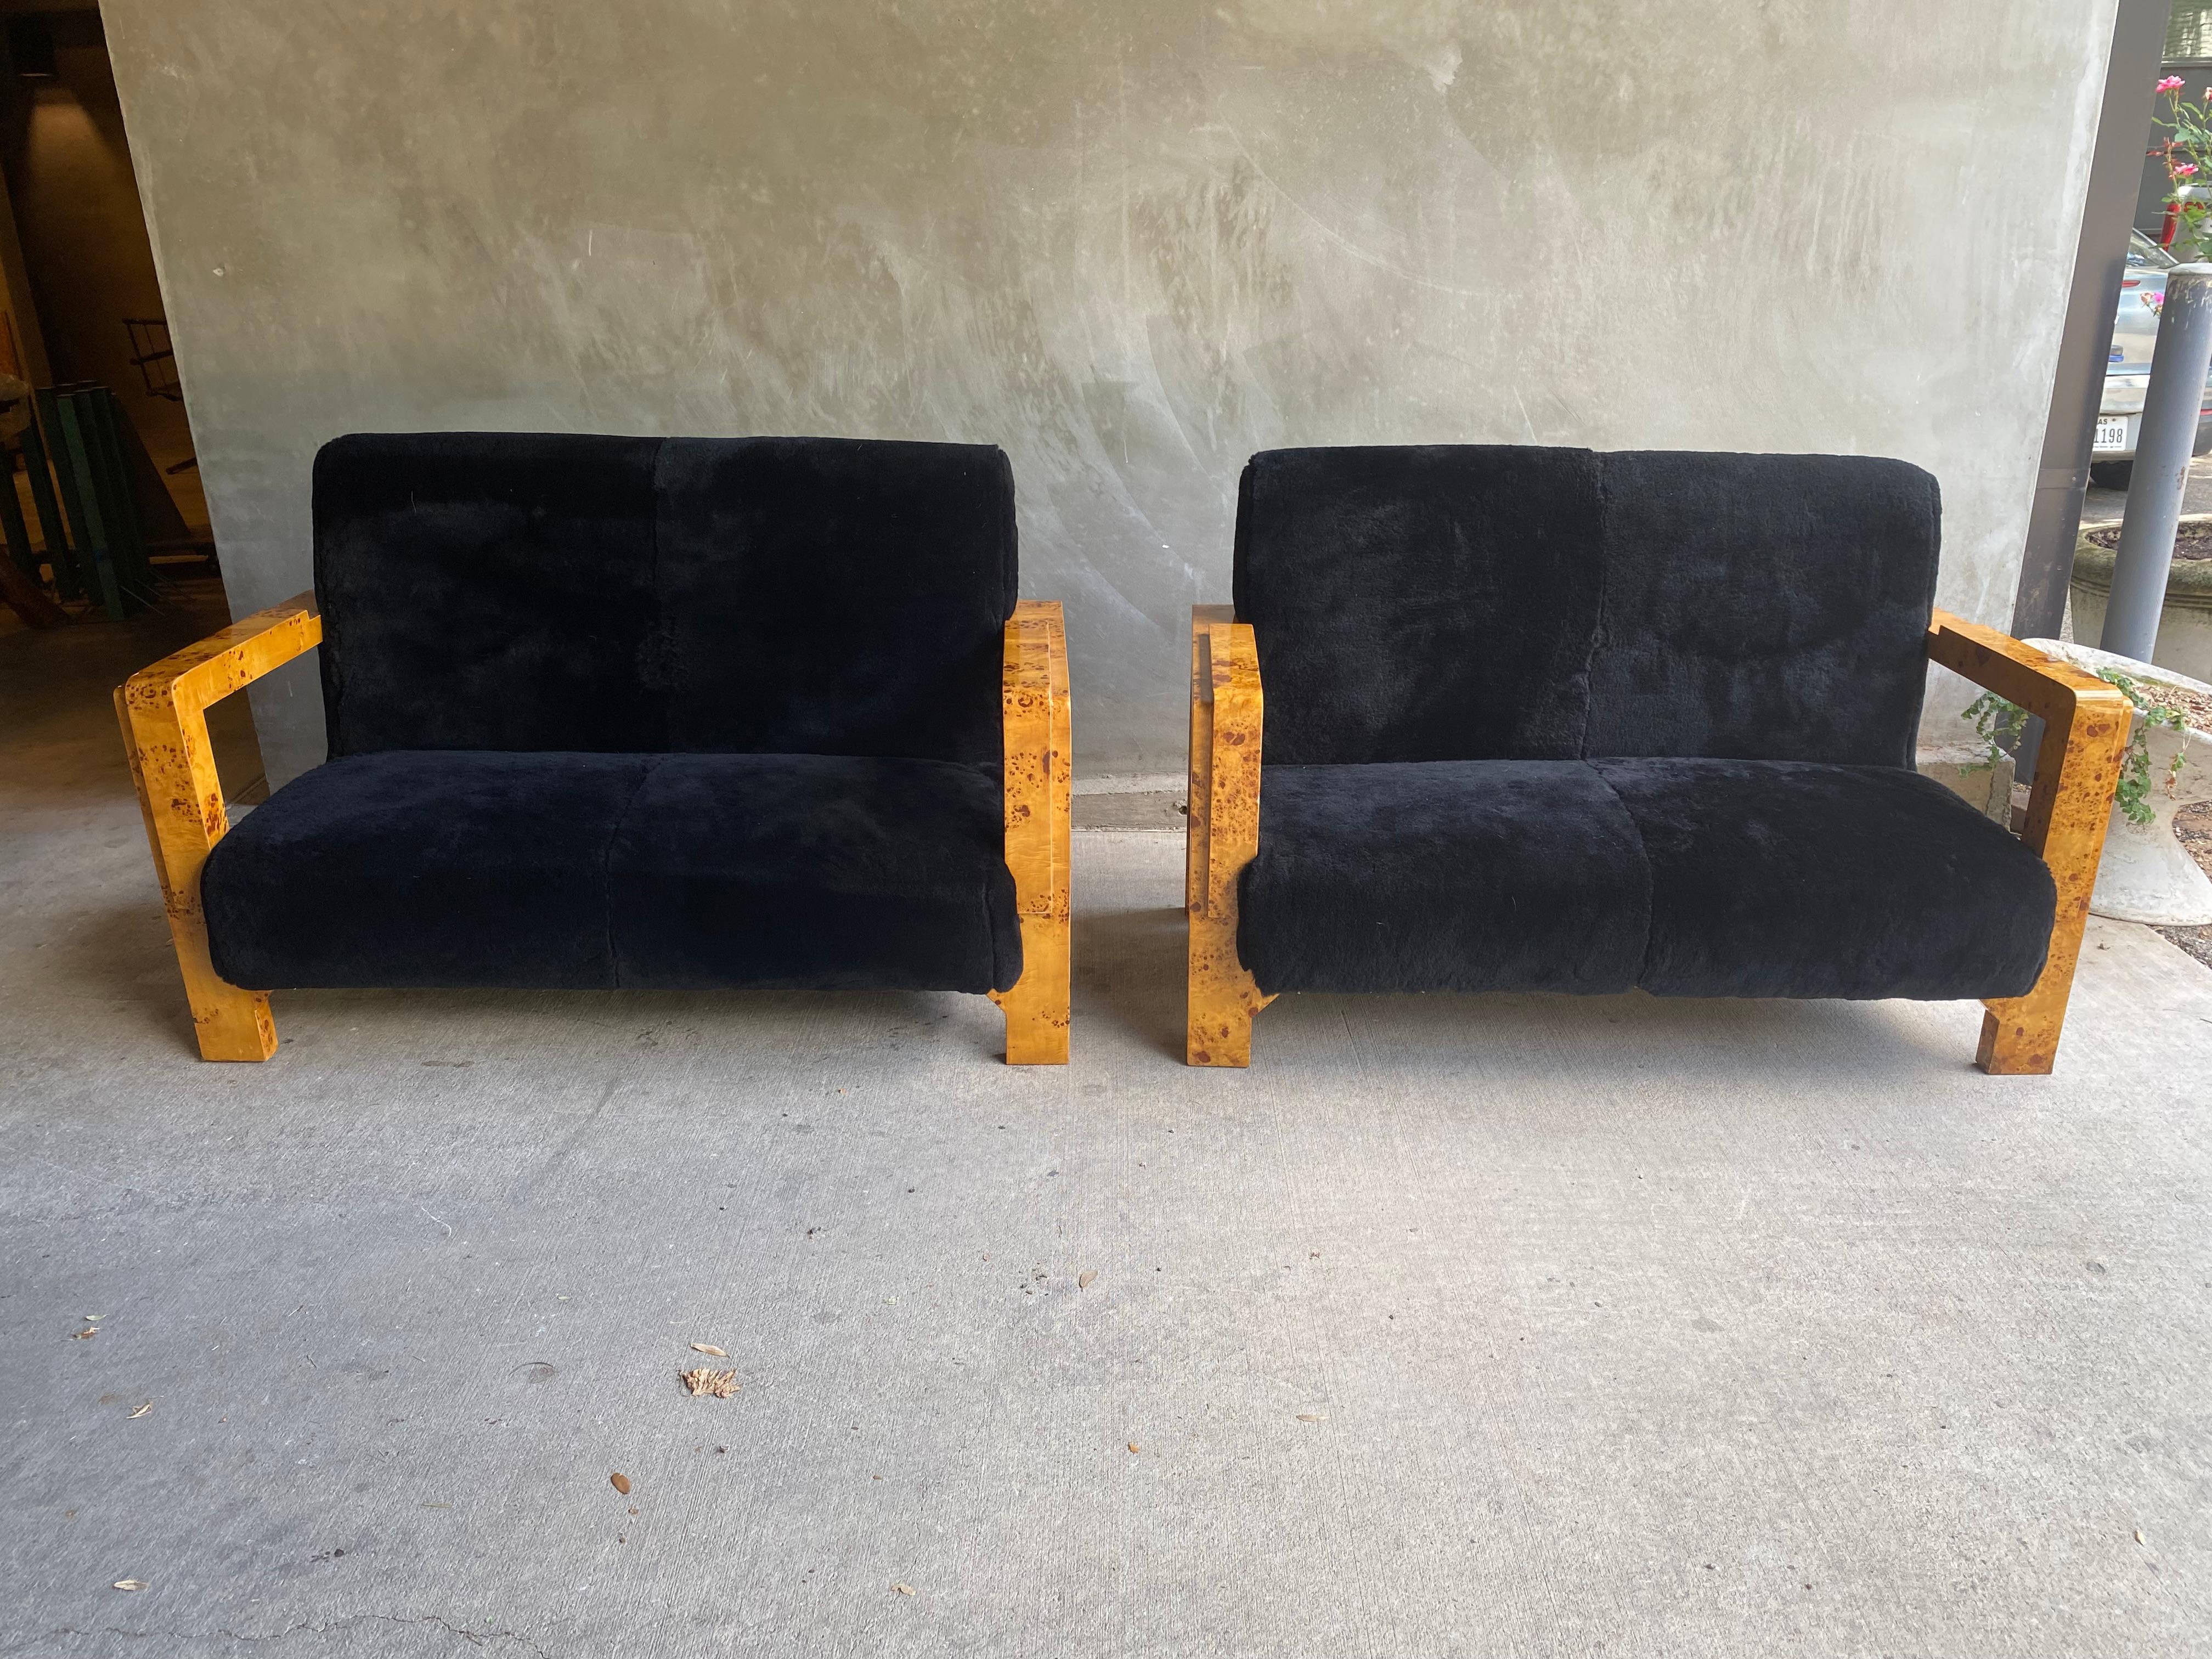 Art Deco settee, loveseat or bench with burled olive wood frame from 1920-1930, newly upholstered in luxurious black shearling (sheepskin) hides. Two available, sold separately.